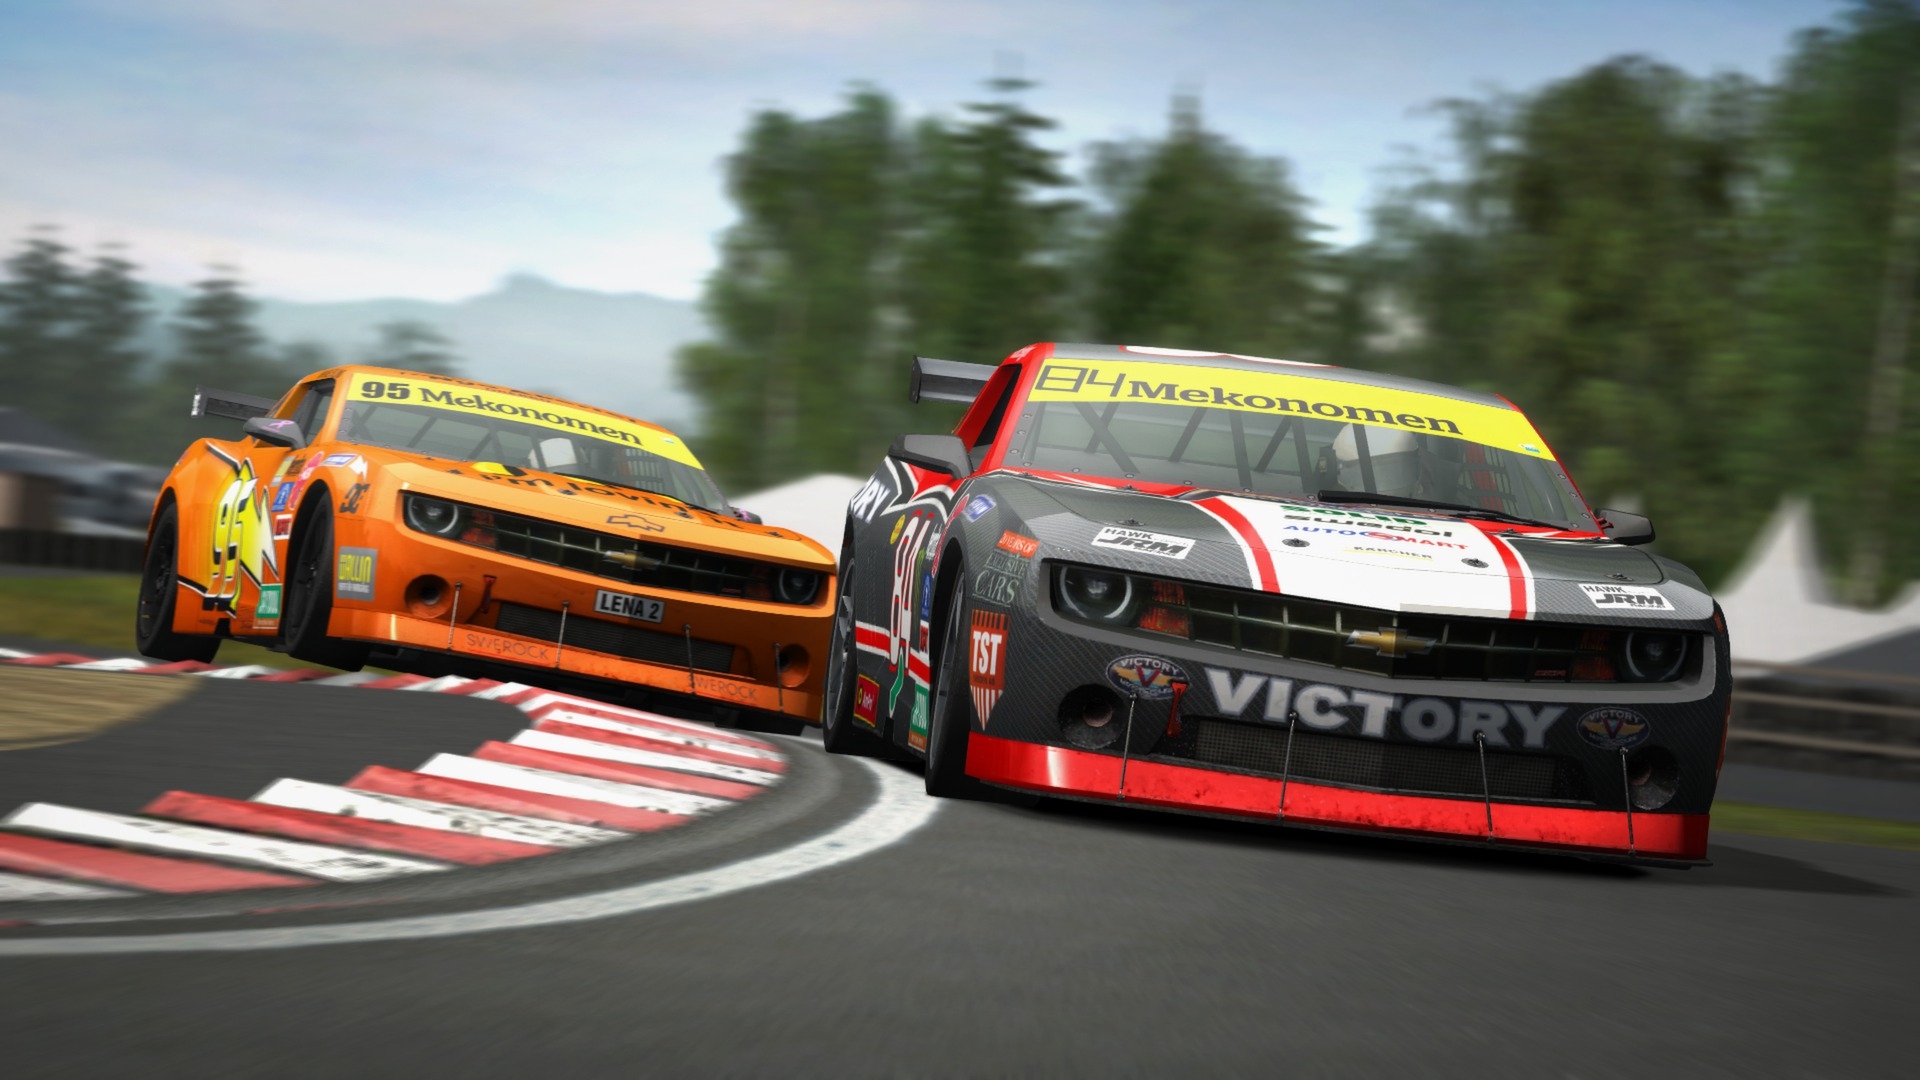 The Best PC Racing Games for 2020 | PCMag